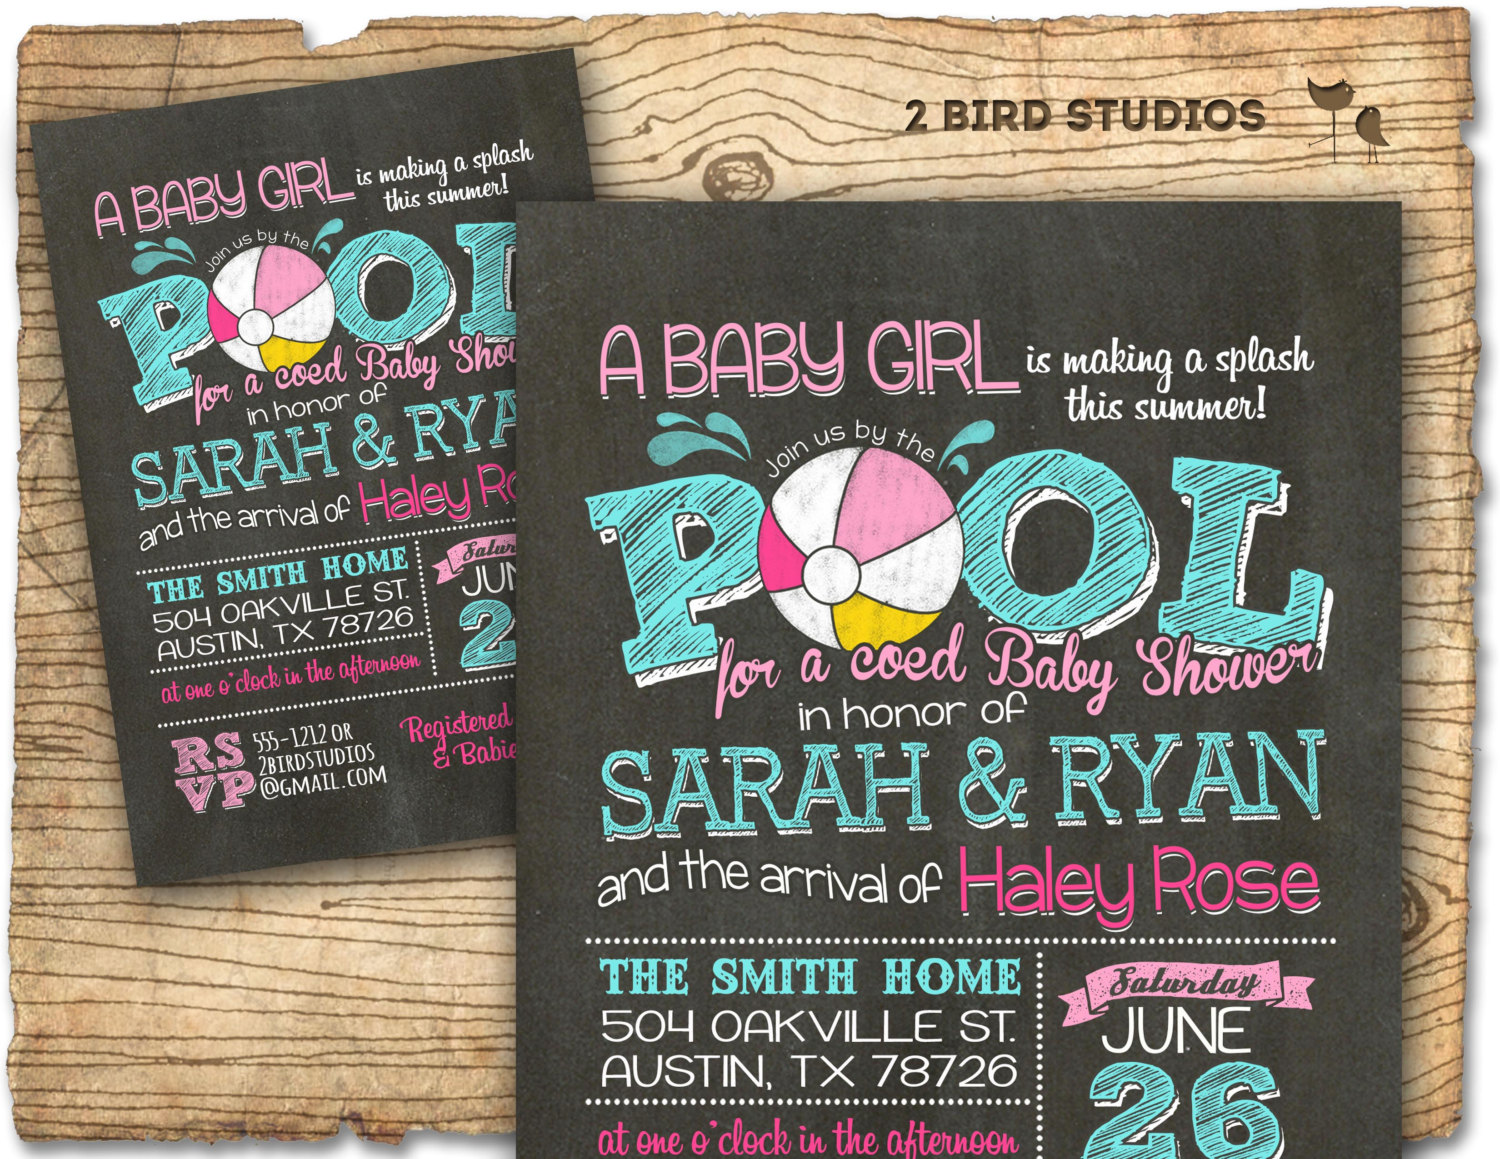 Full Size of Baby Shower:precious Coed Baby Shower Picture Designs Bbq Baby Shower Theme 300x250 Bbq Best Coed Ideas Misaitcom Il Fullxfull 792174549 Izsm Jpg Version 0 Bbq Baby Shower Pool Party Invitation Summer Coed Zoom 1500x1159